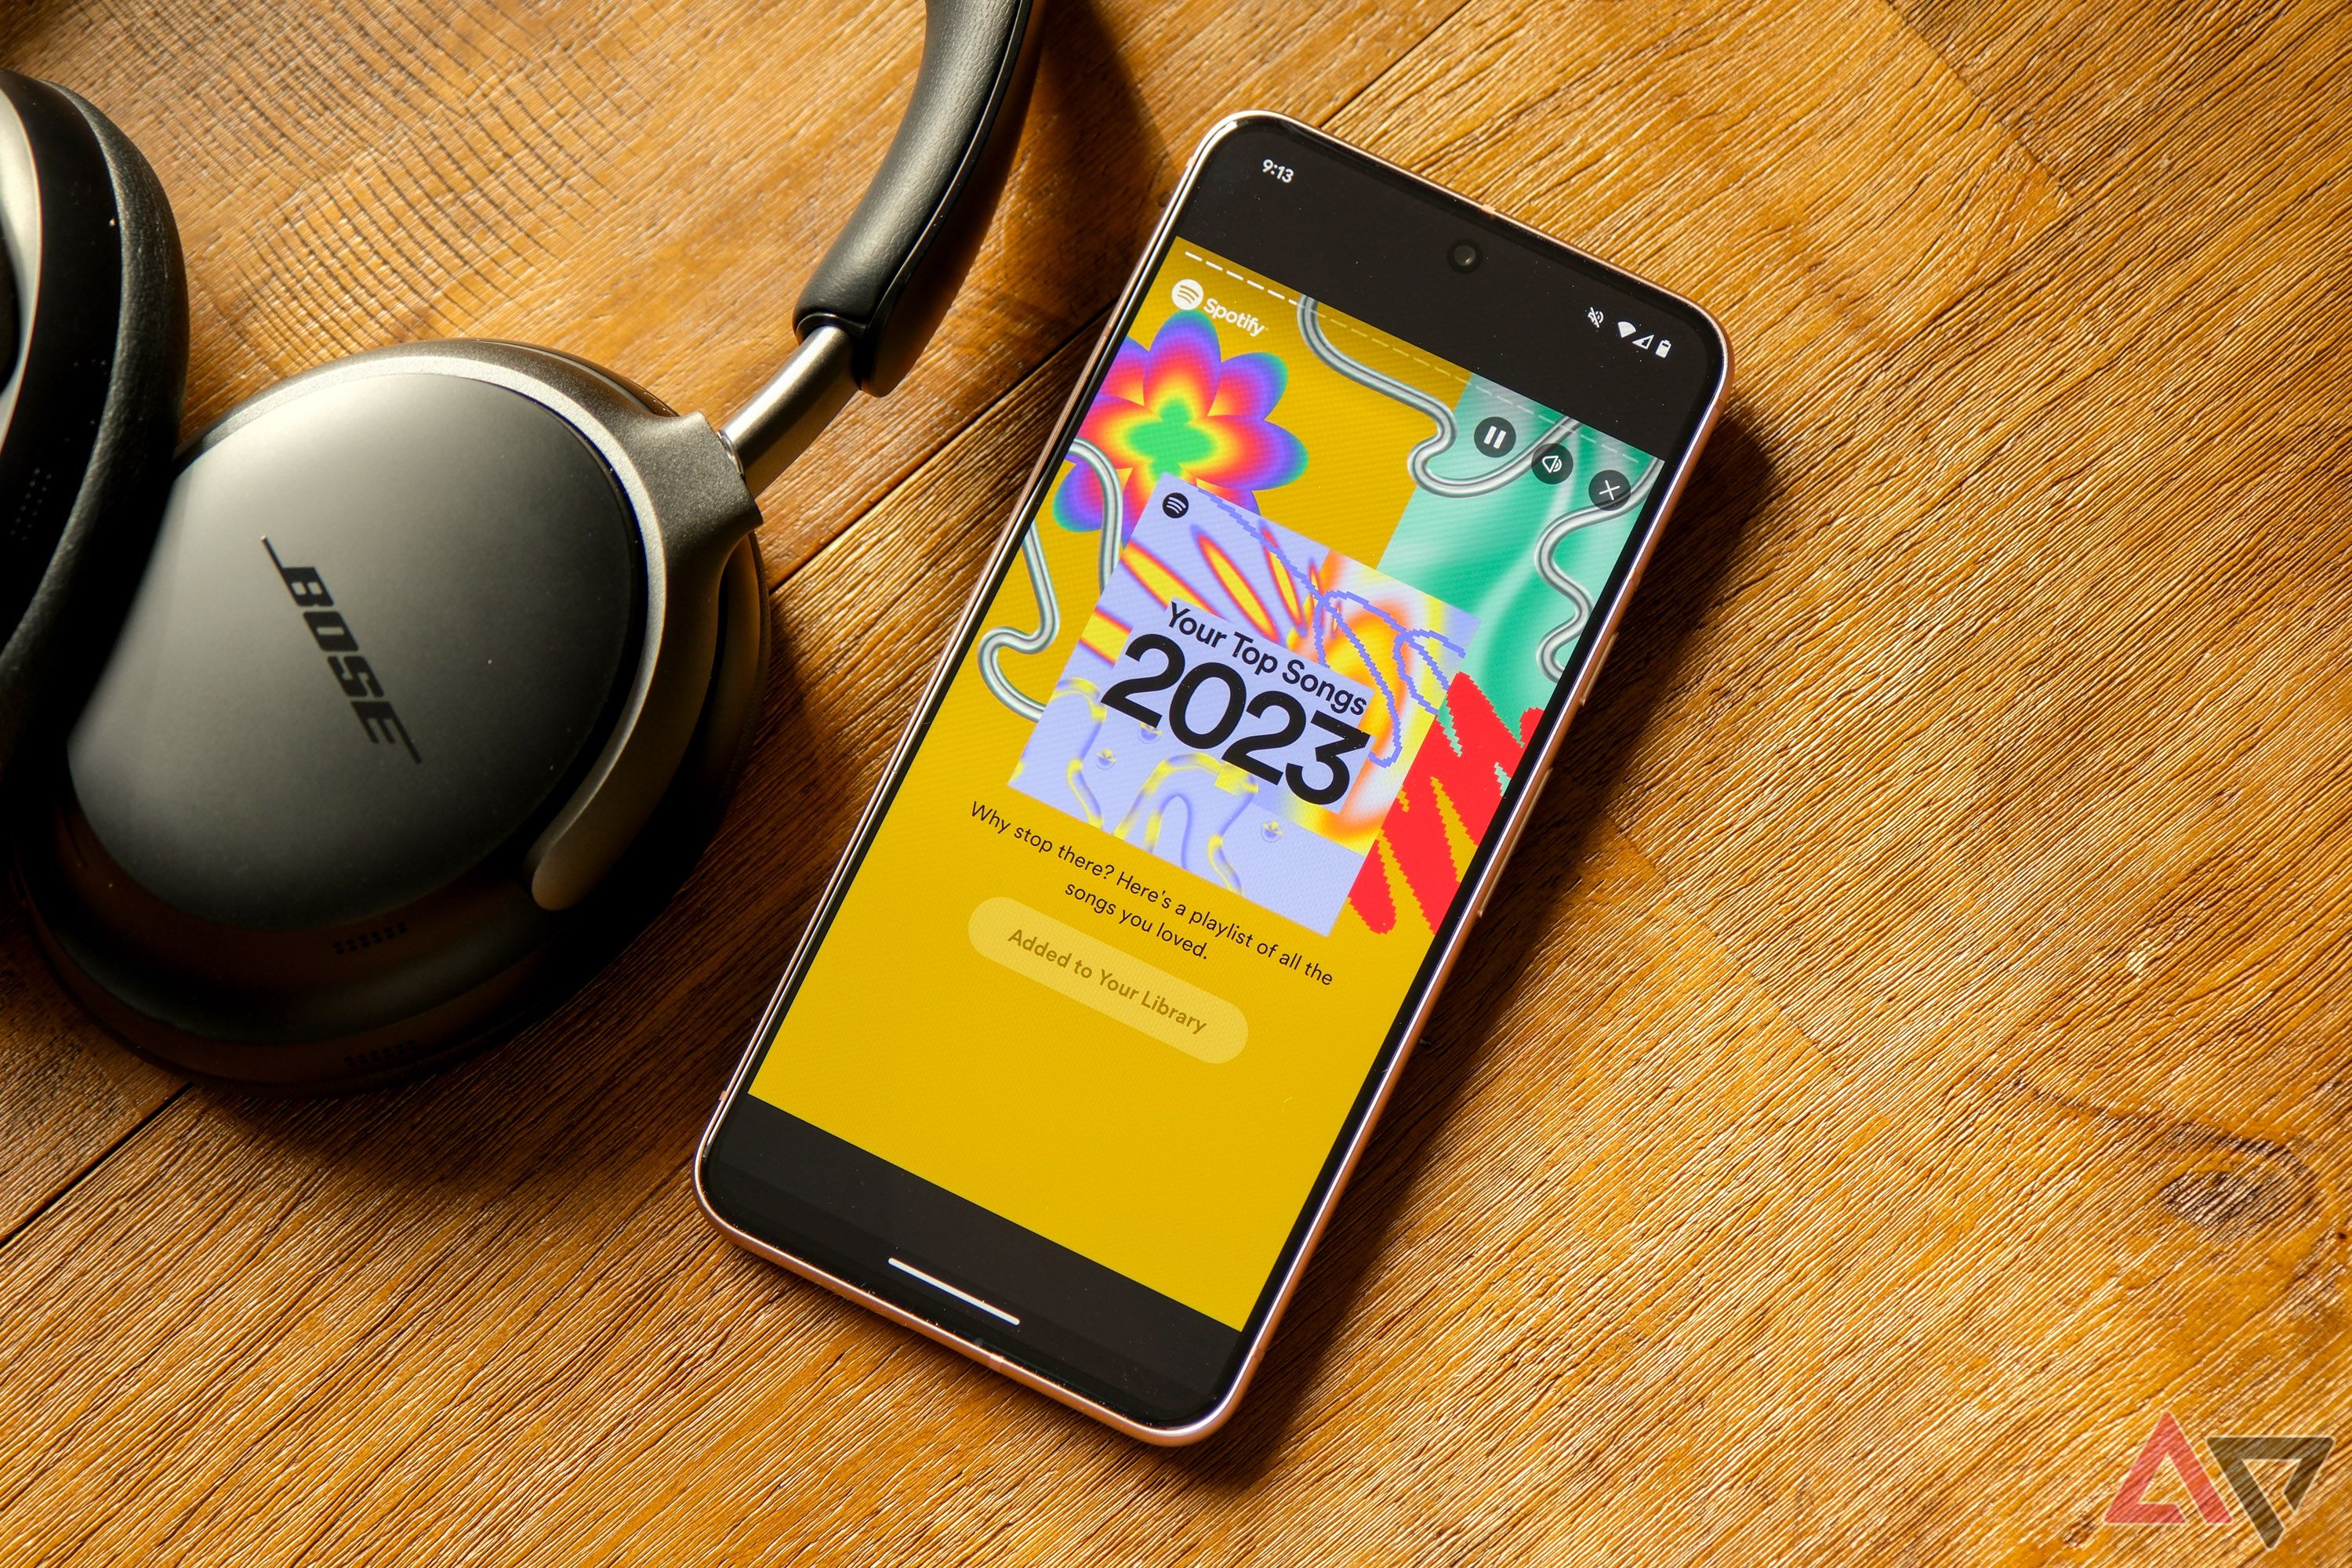 A smartphone displaying the Spotify app next to a pair of Bose headphones